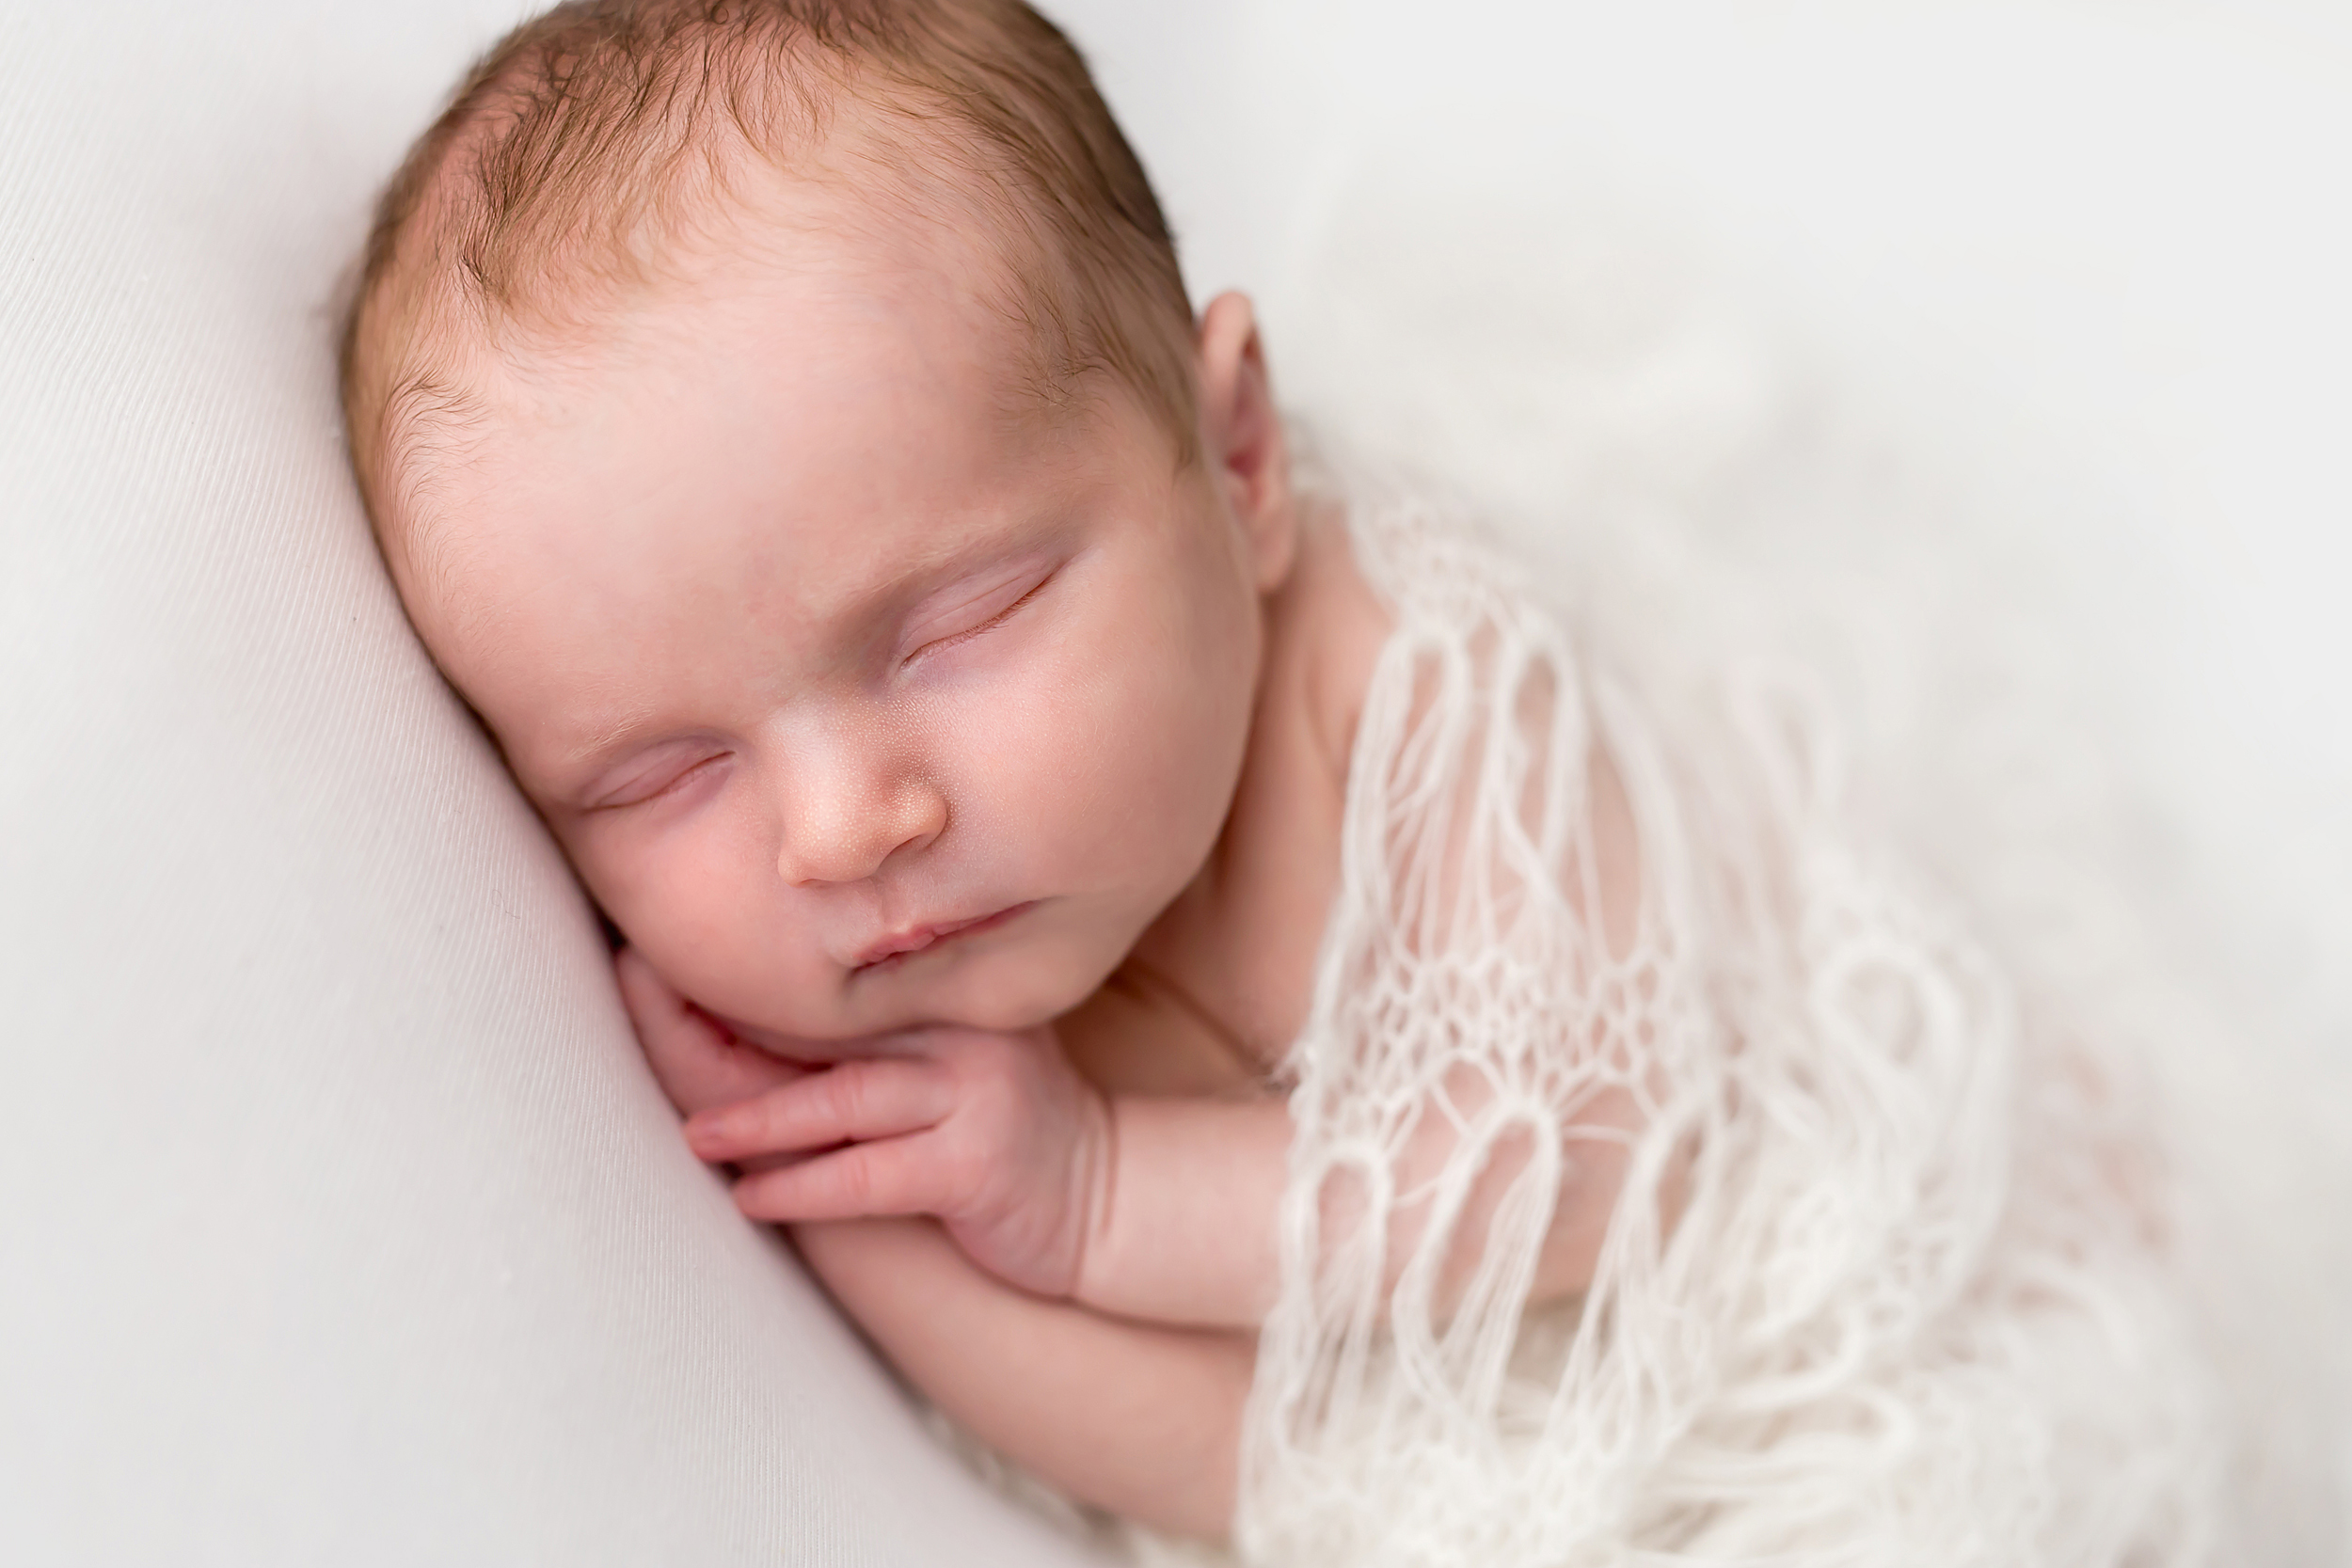 Melbourne newborn photographer has taken a photo of a baby girl sleeping on her side and covered in a knitted blanket.